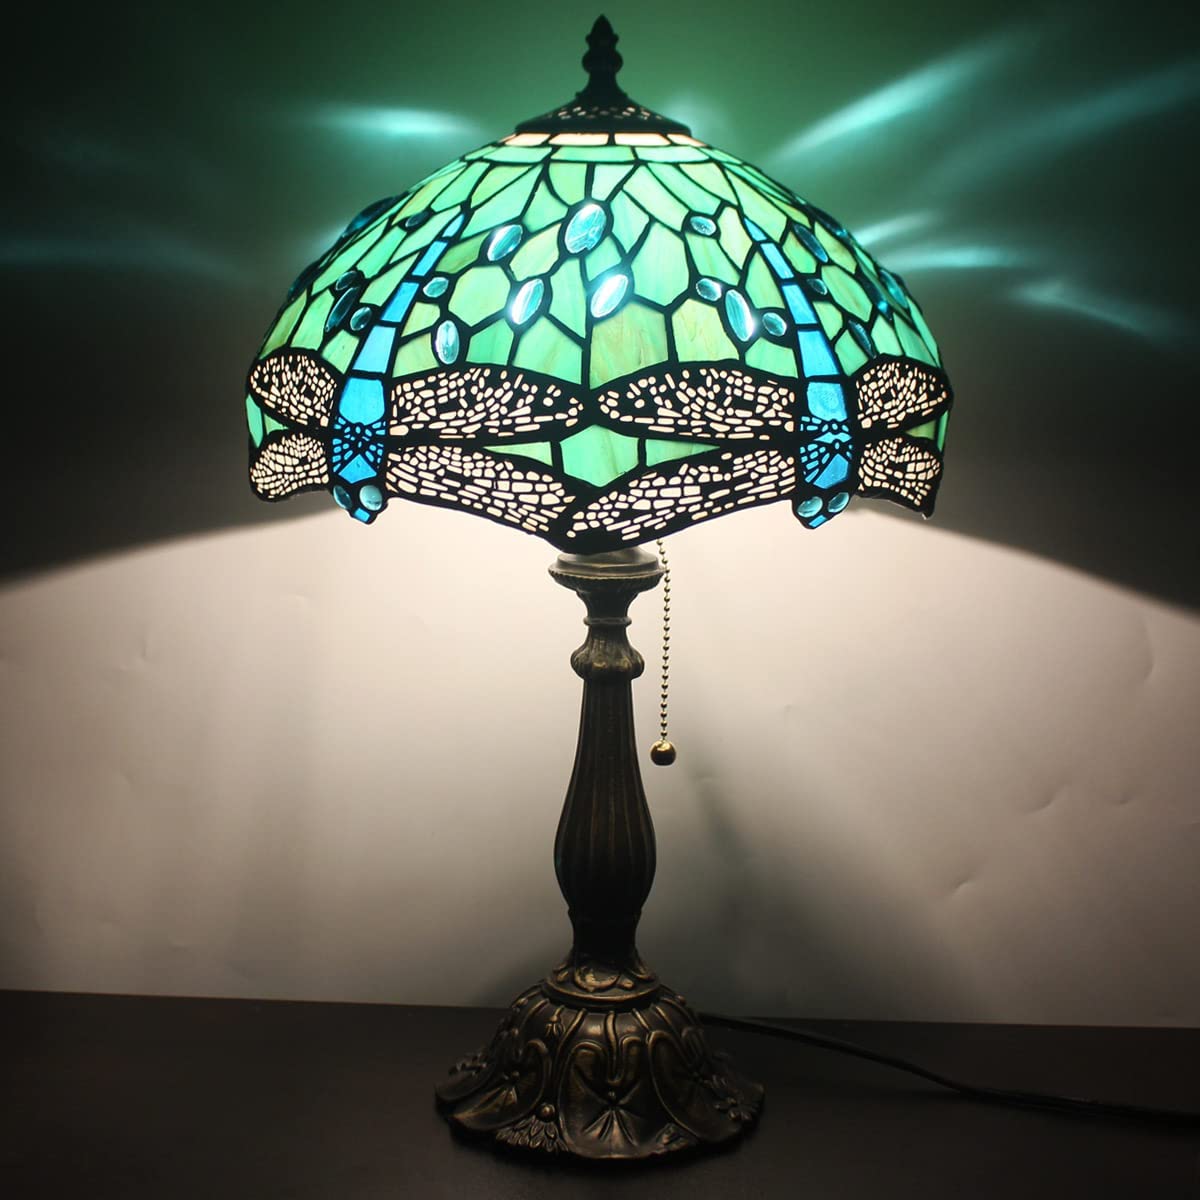 SHADY  Lamp W12H19 Inch Green Stained Glass Dragonfly Style Table Reading Lamp Nightstand Bedside Desk Light Decor Living Room Bedroom Home Office Work Study Pull Chain Switch